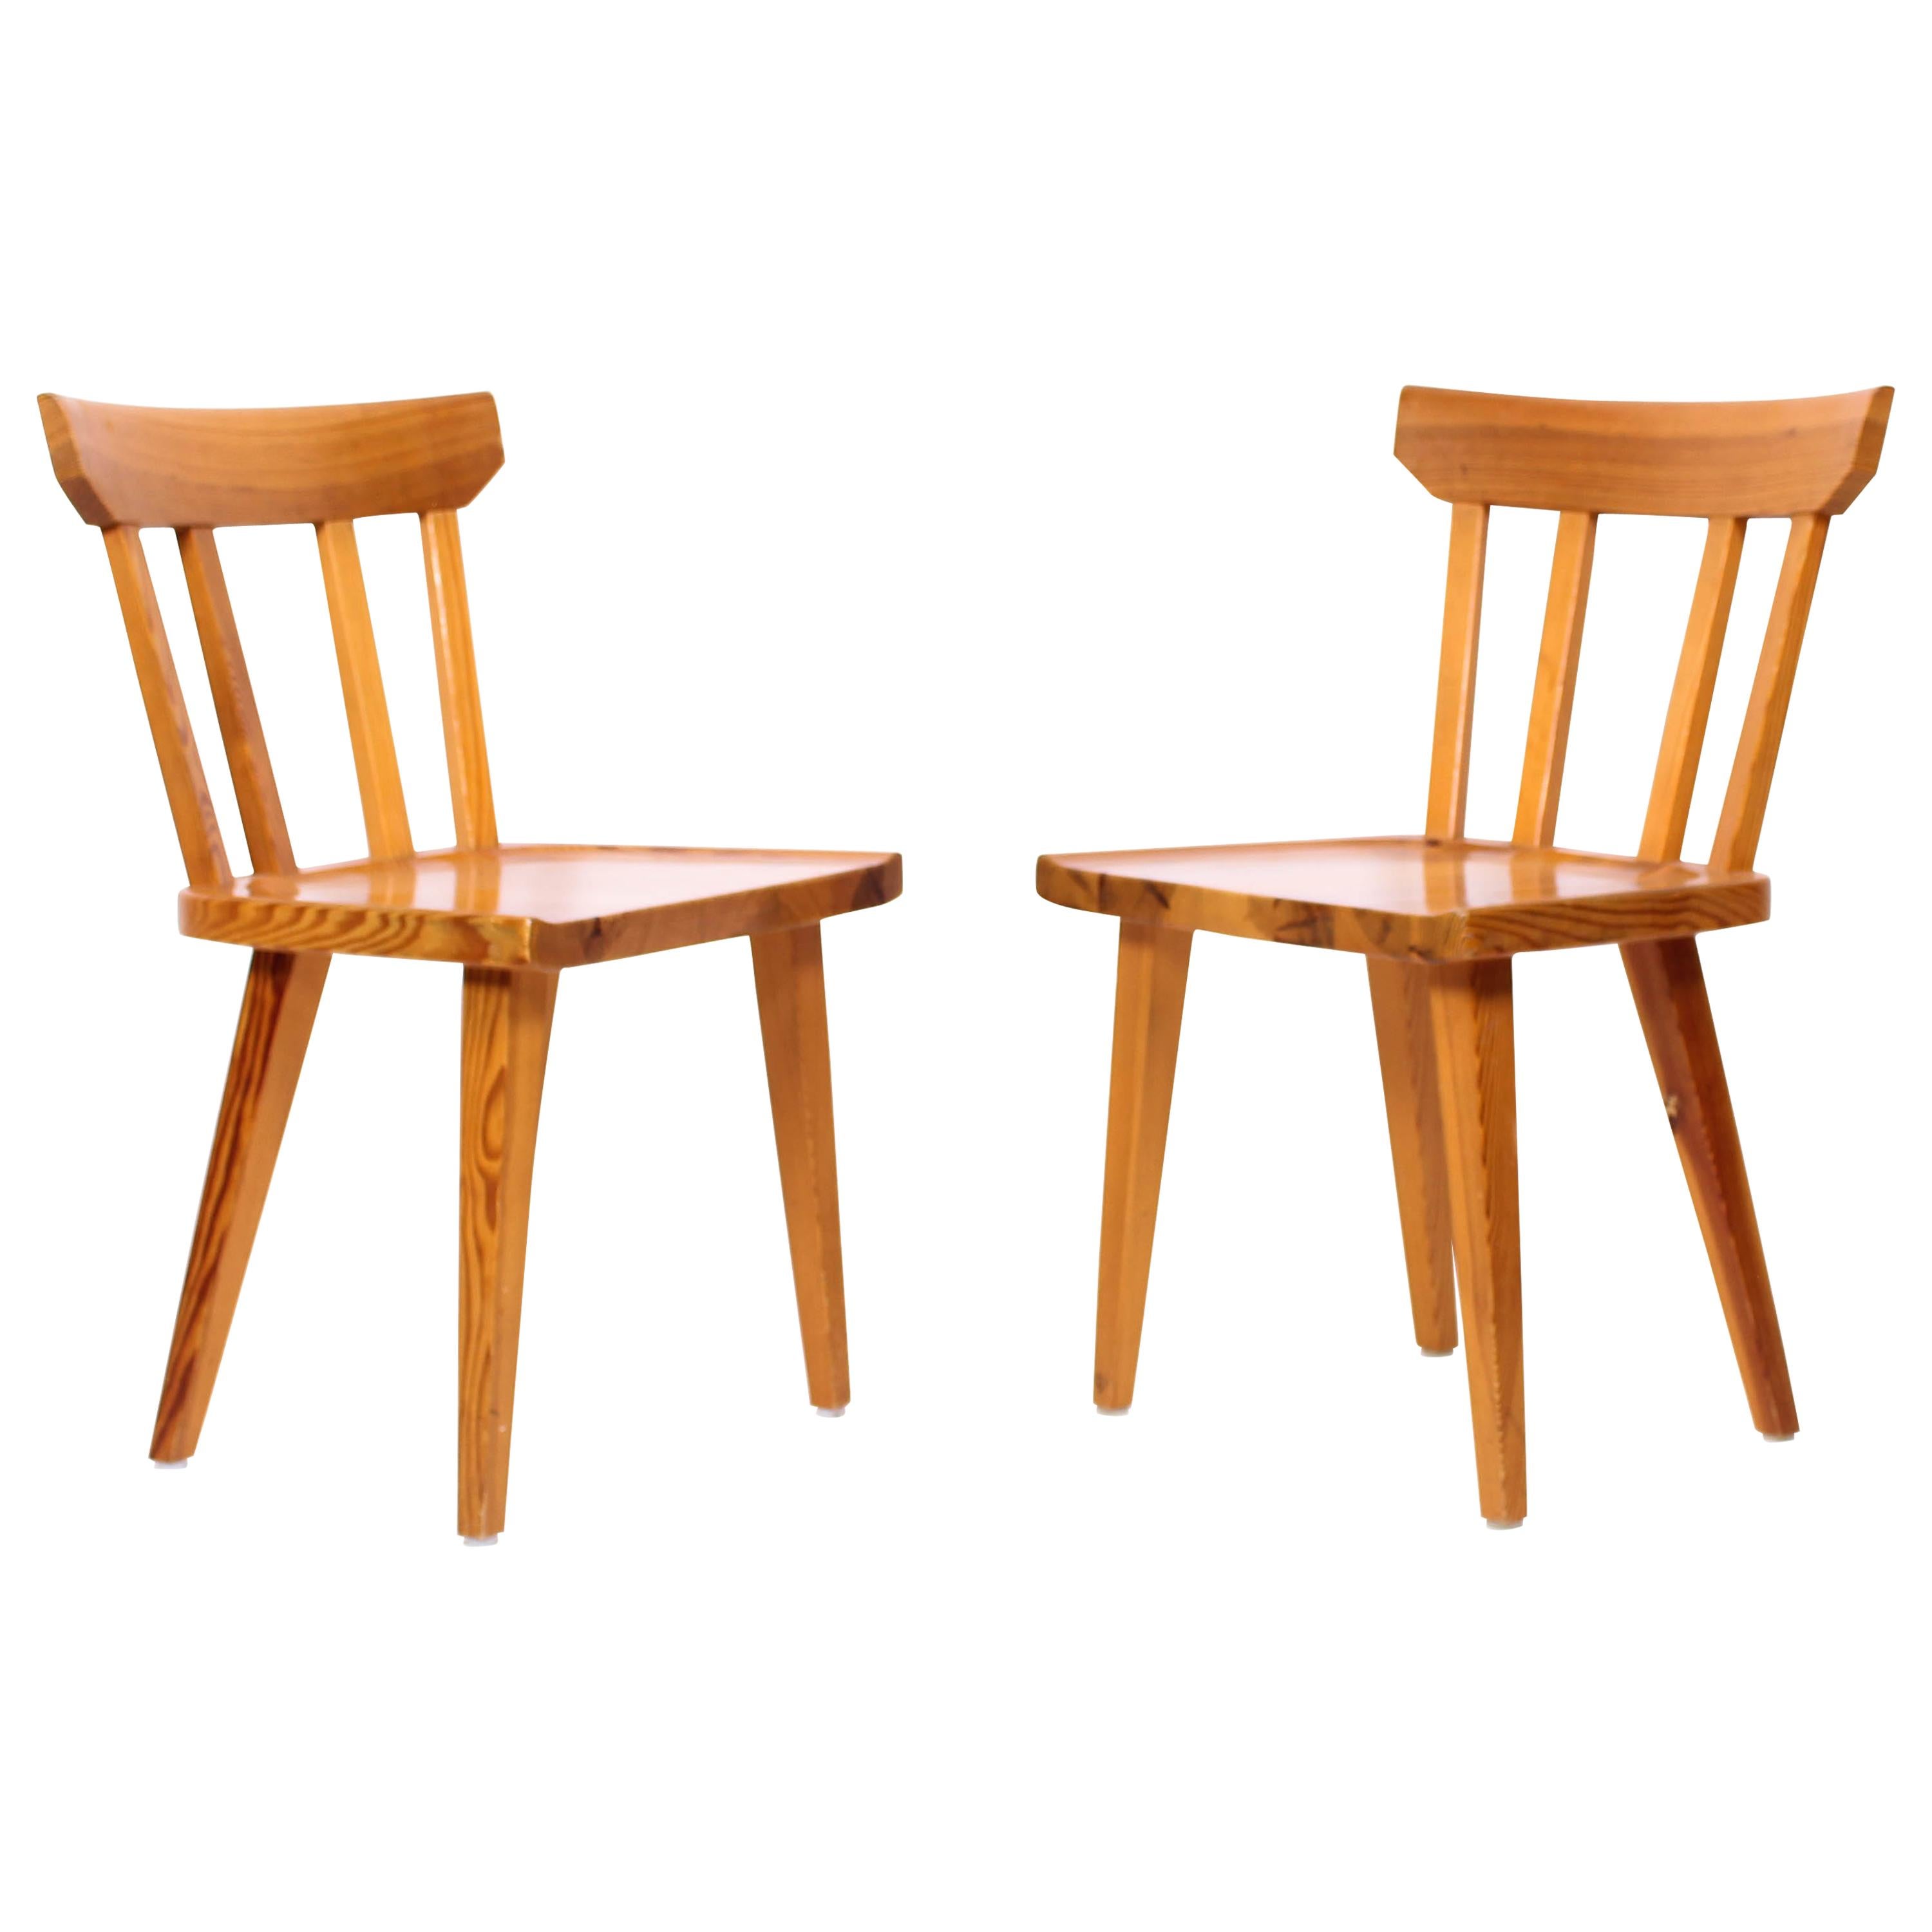 Pair of Midcentury Pine Dining Chairs by Karl Andersson & Söner